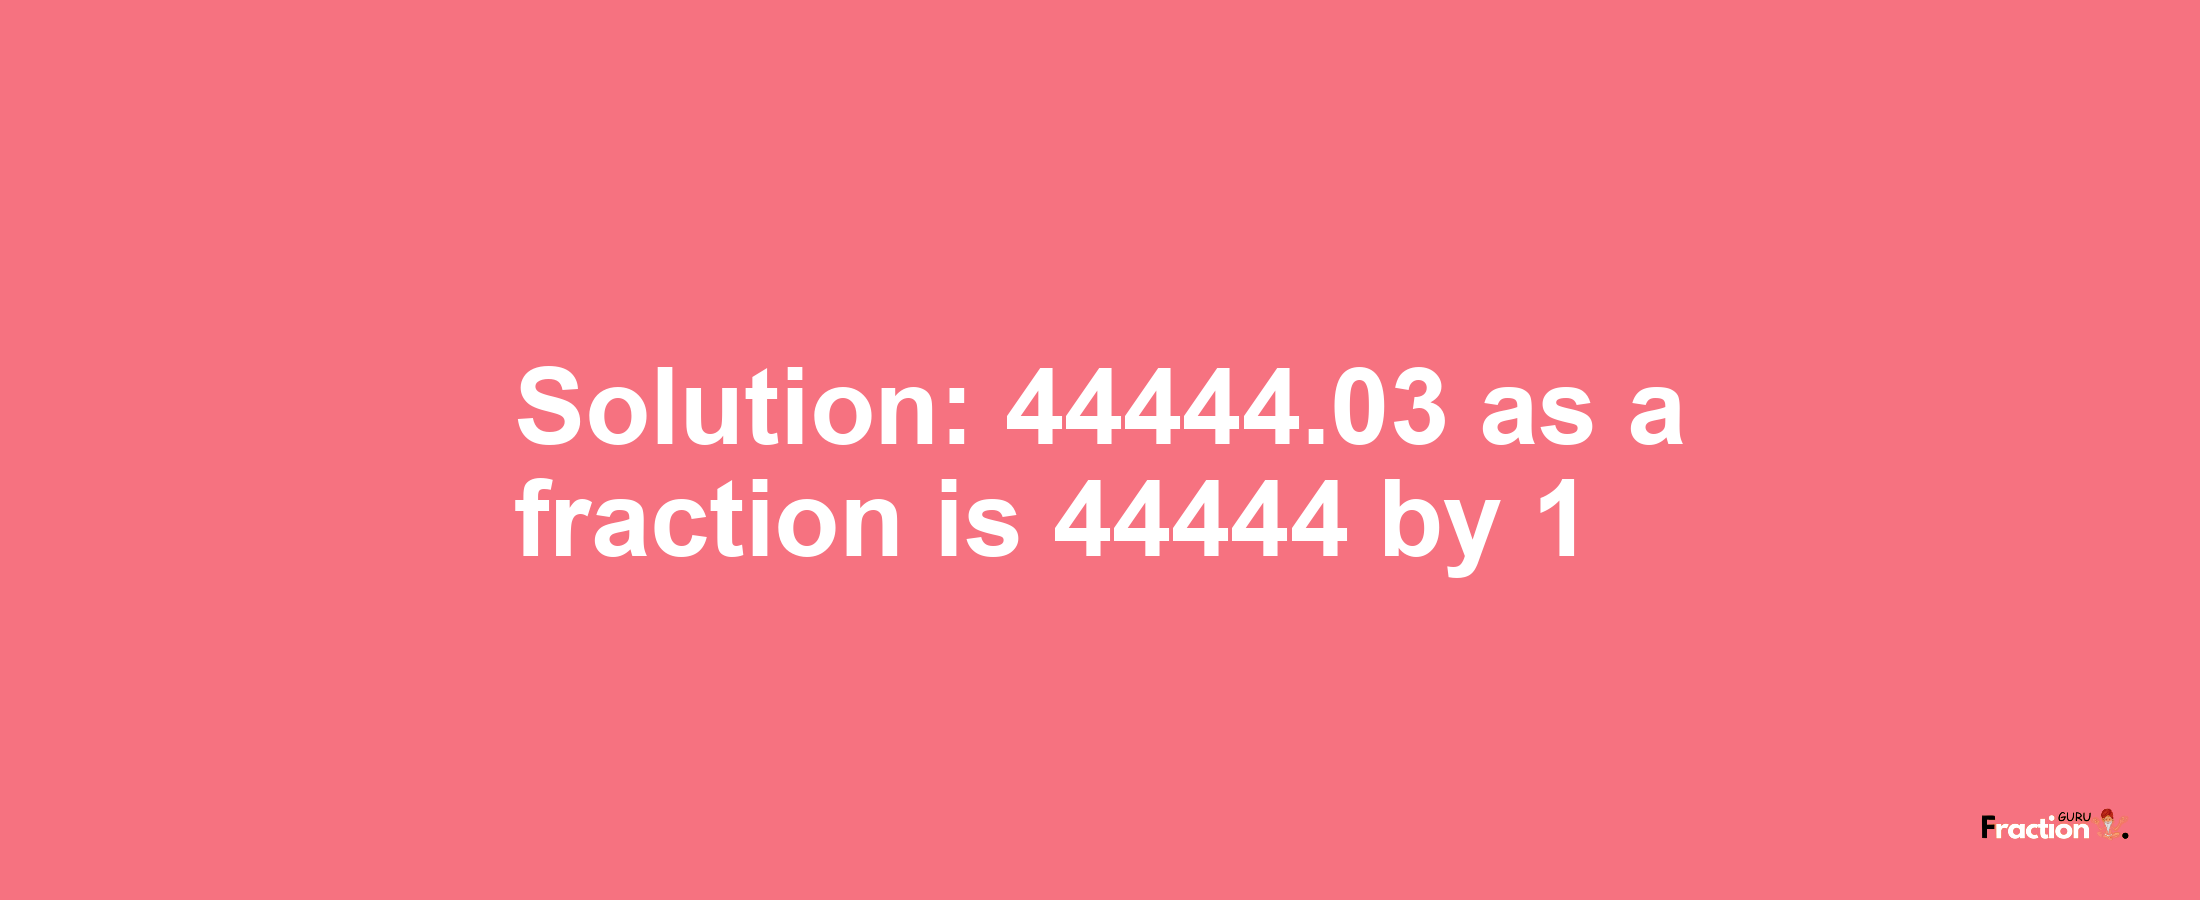 Solution:44444.03 as a fraction is 44444/1